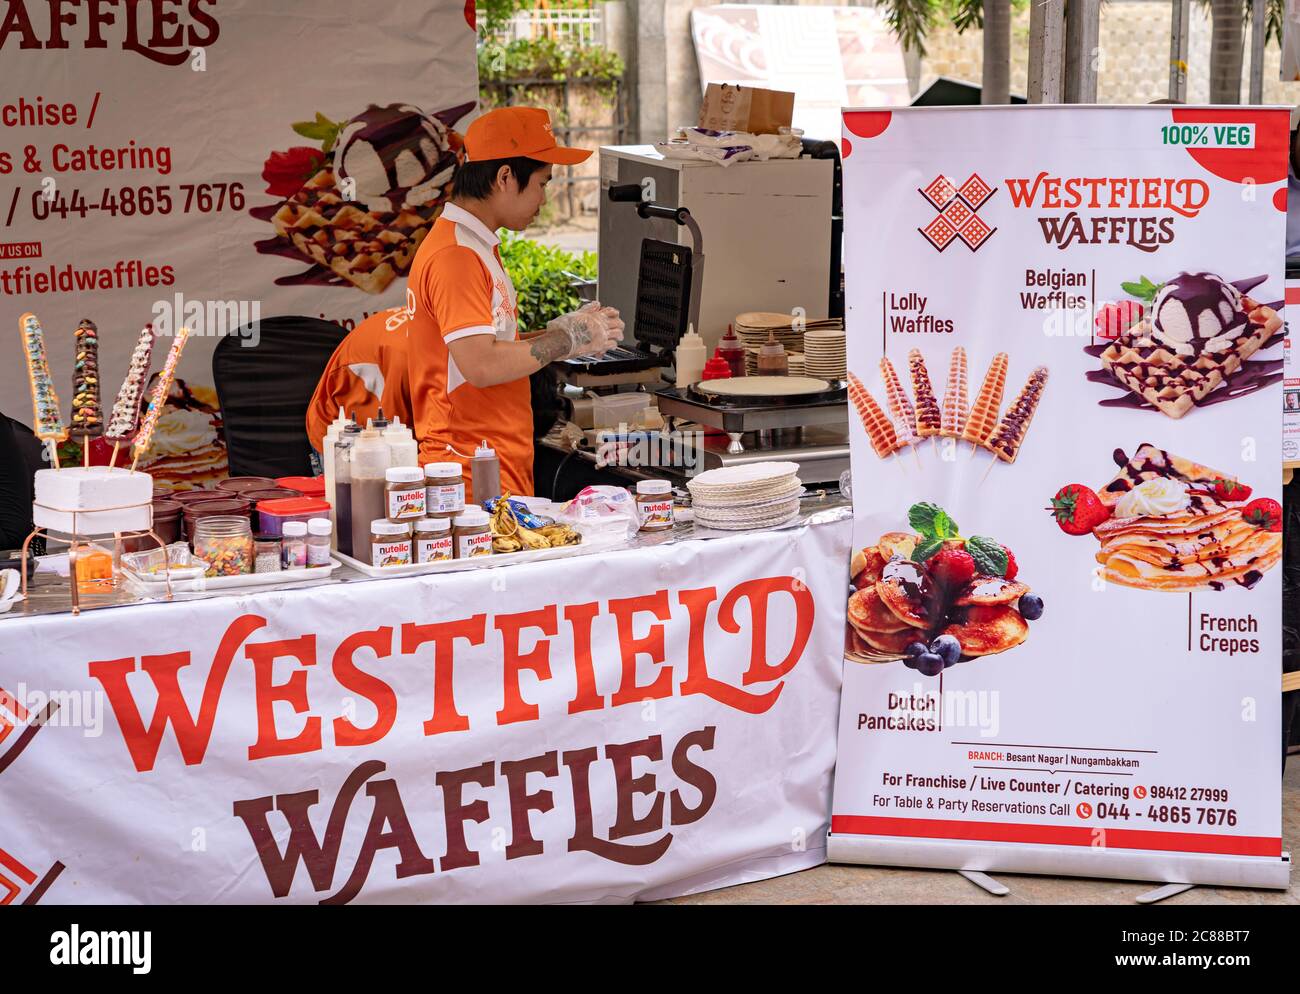 An employee working at a food stall serving waffles, crepes, and pancakes at a food festival Stock Photo